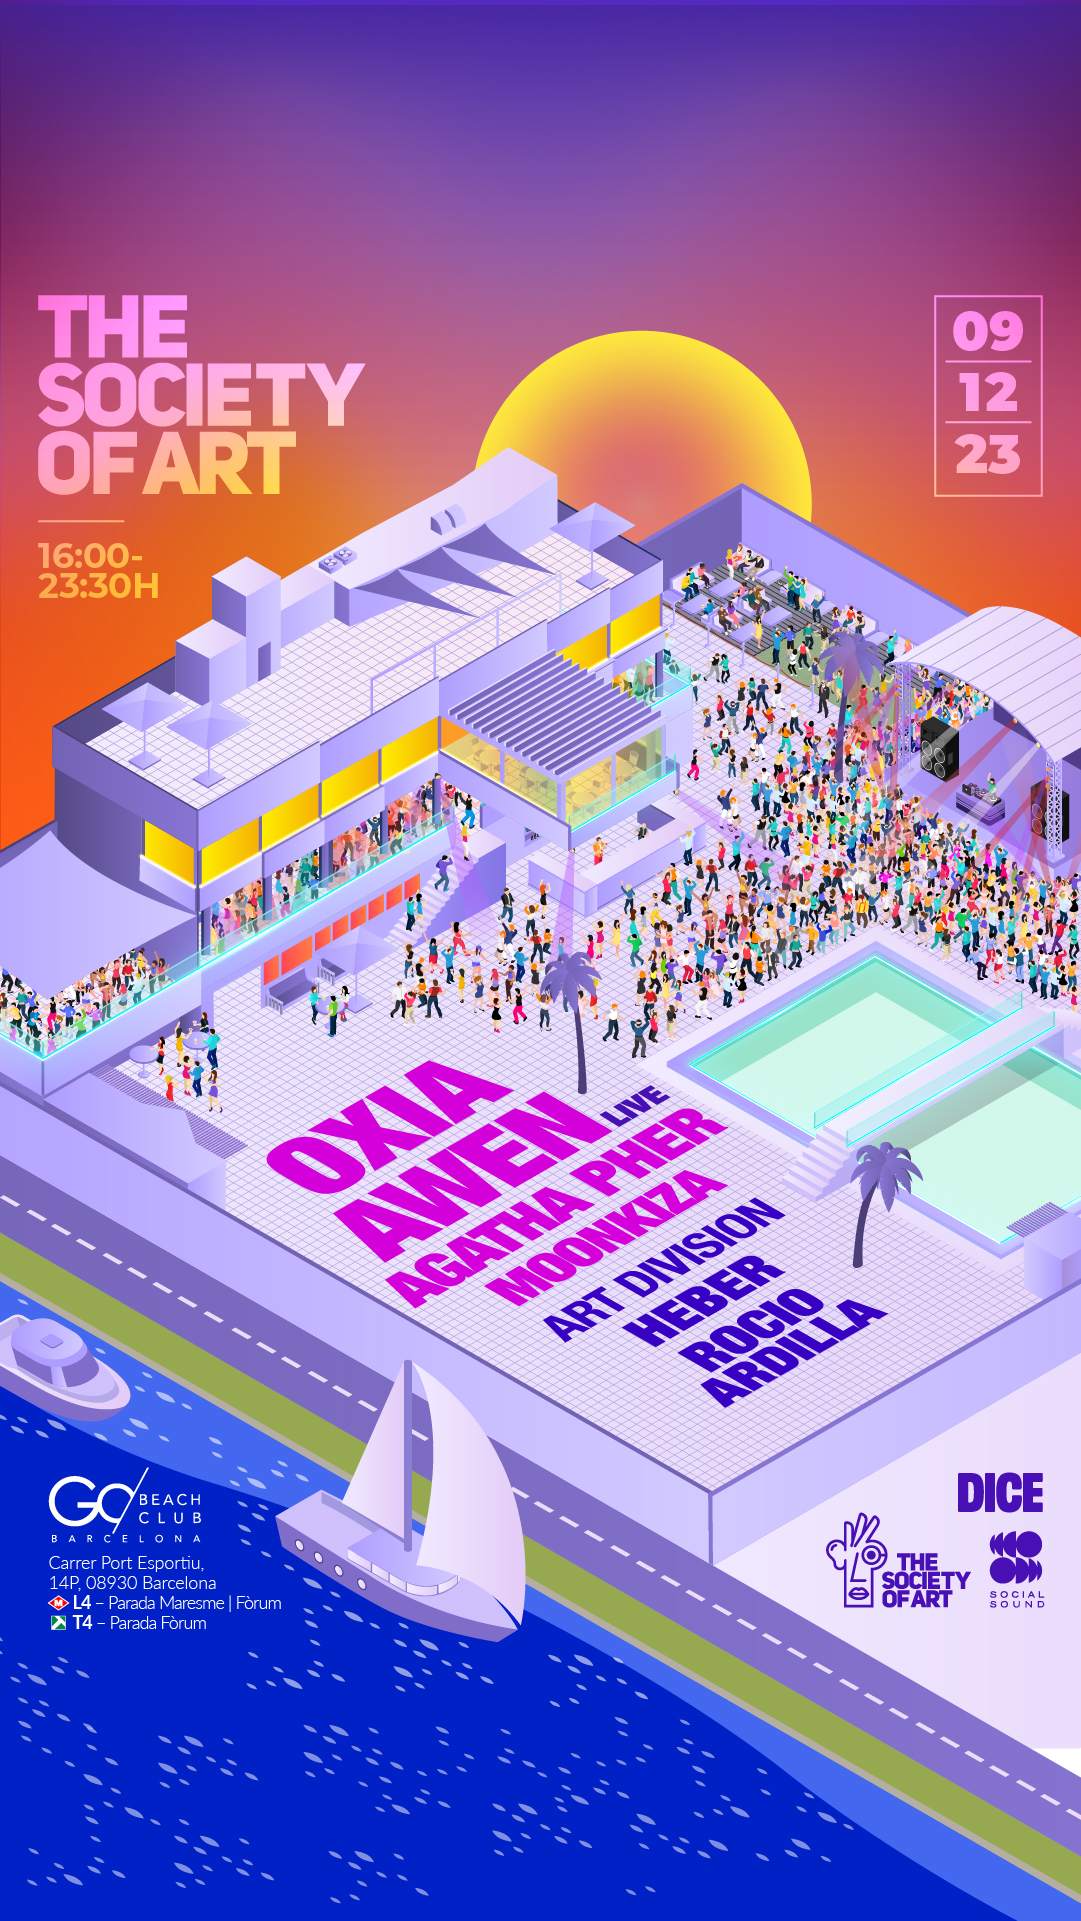 The Society of Art with Oxia & AWEN Live at Go Beach Club ( Sunset ) - フライヤー裏